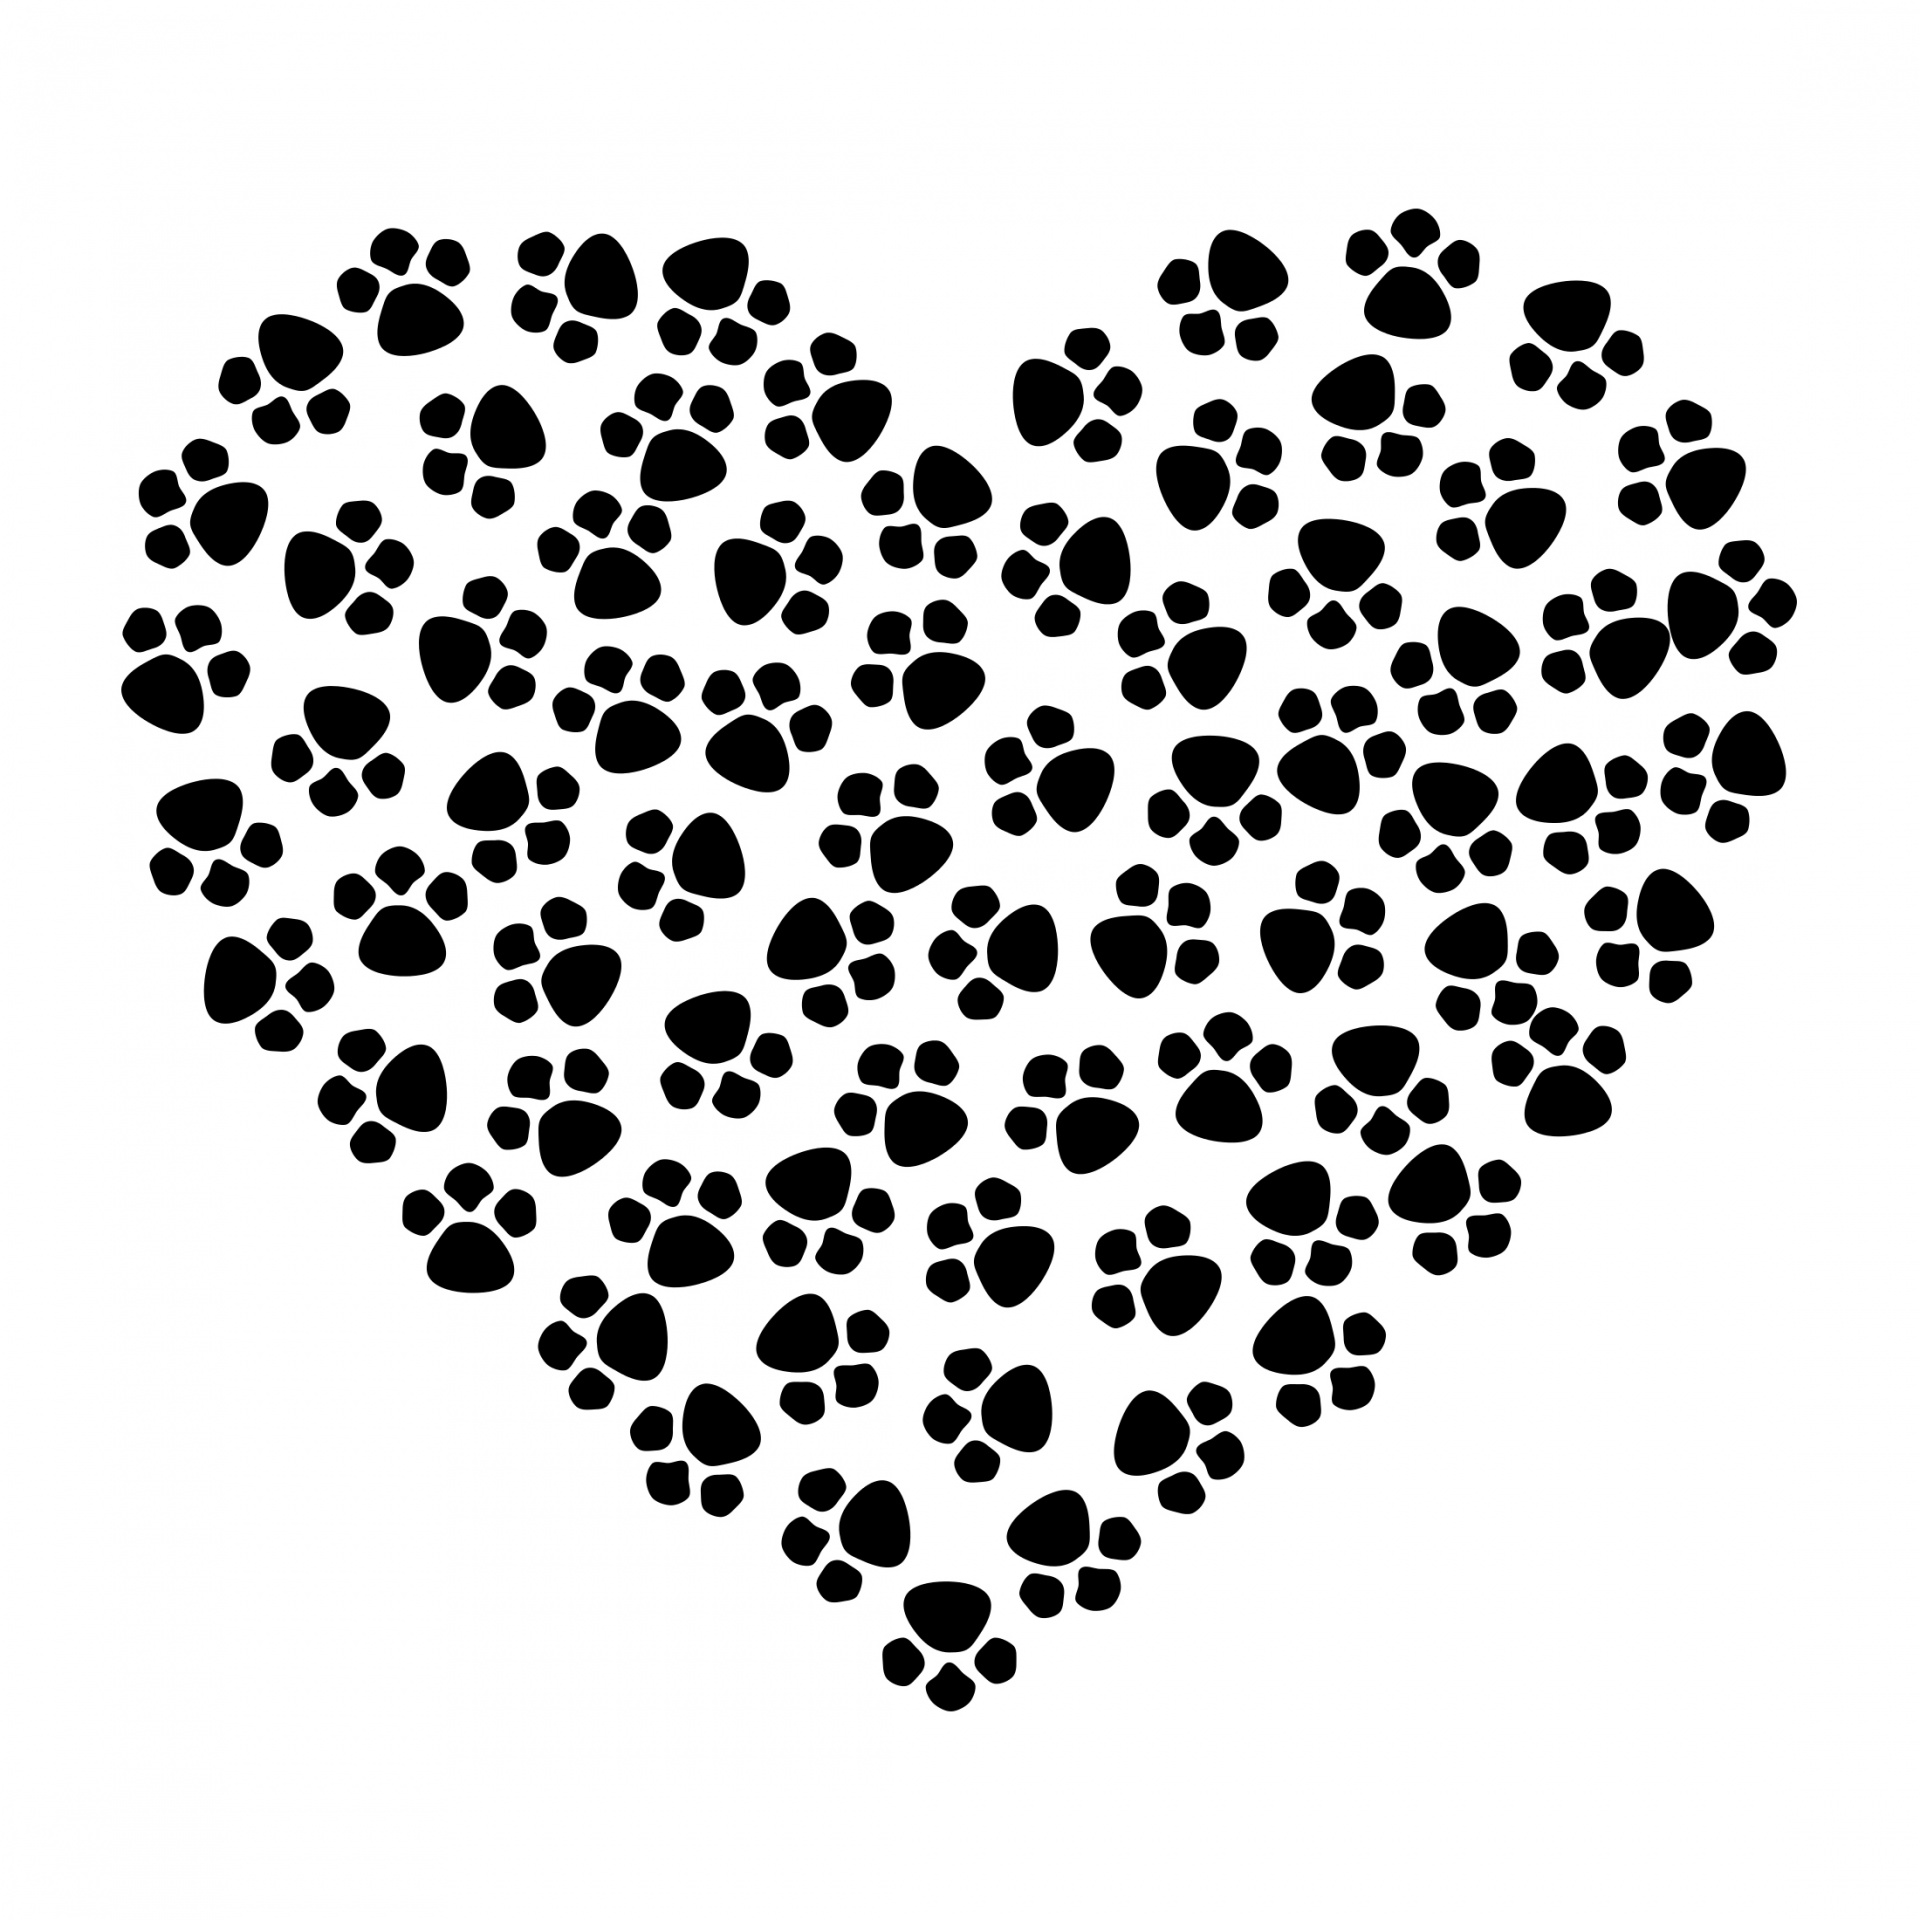 Black paw prints in shape of heart isolated on white background